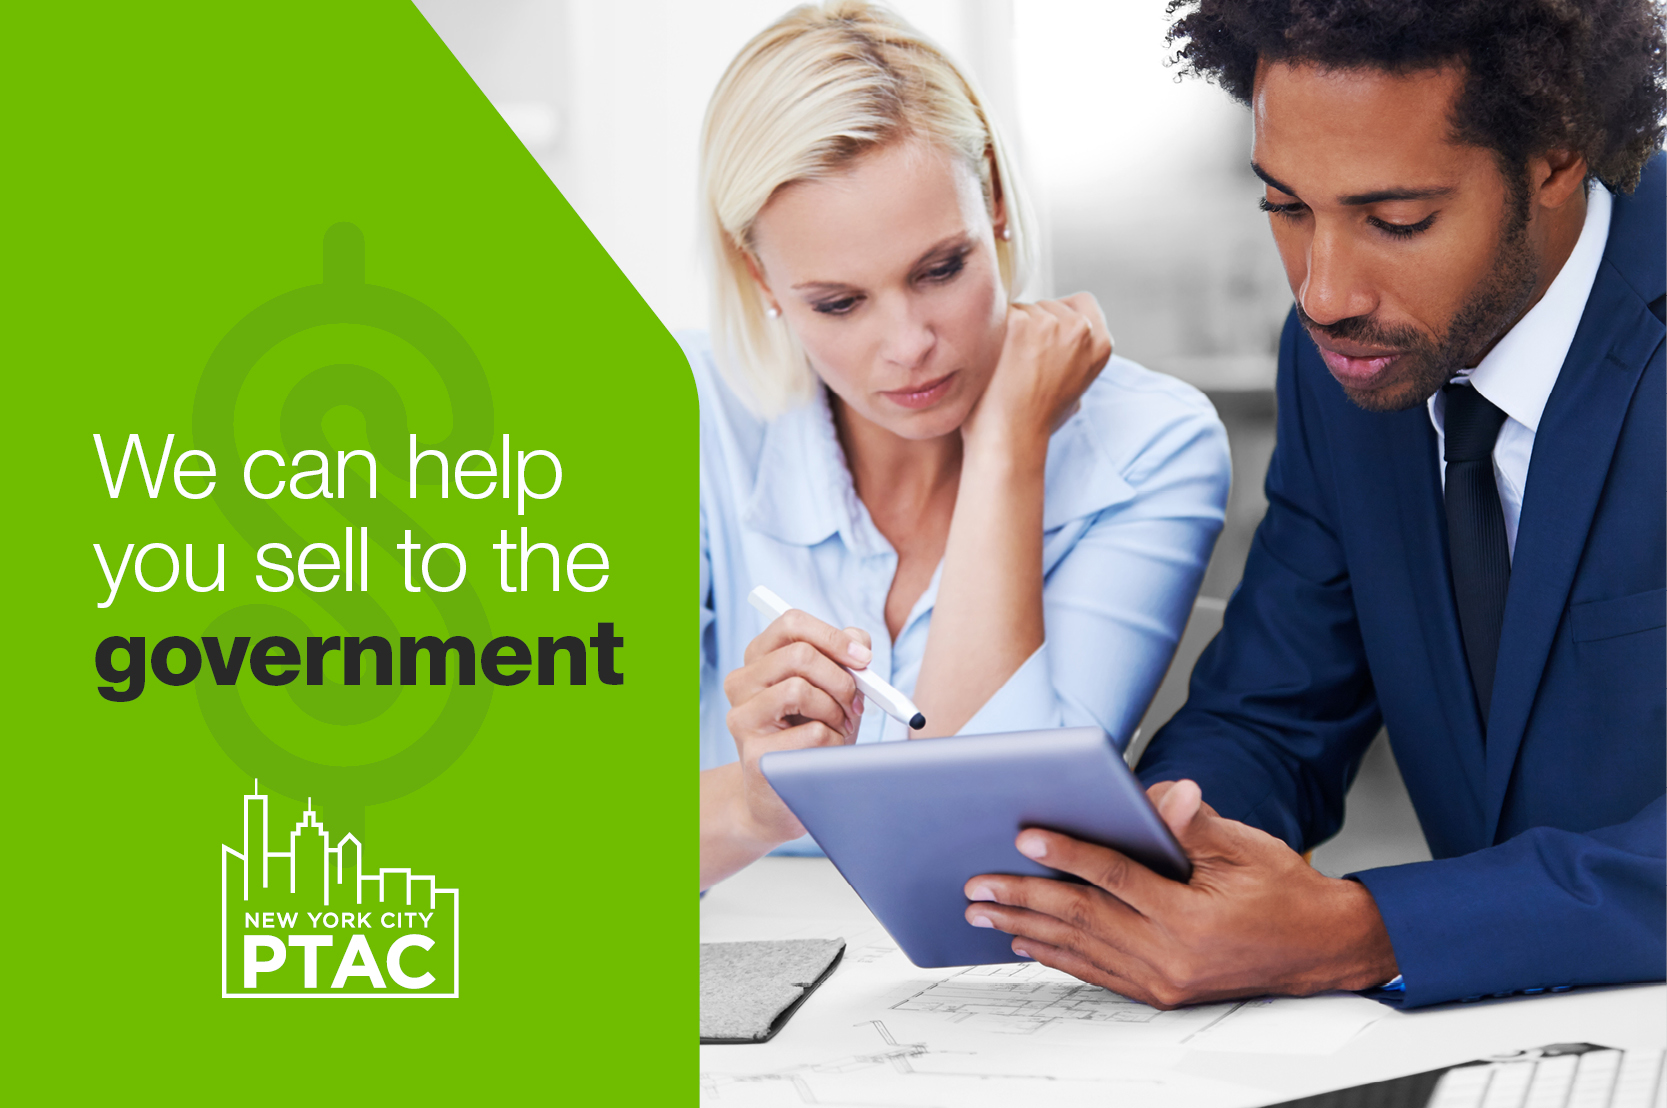 We can help you sell to the government.